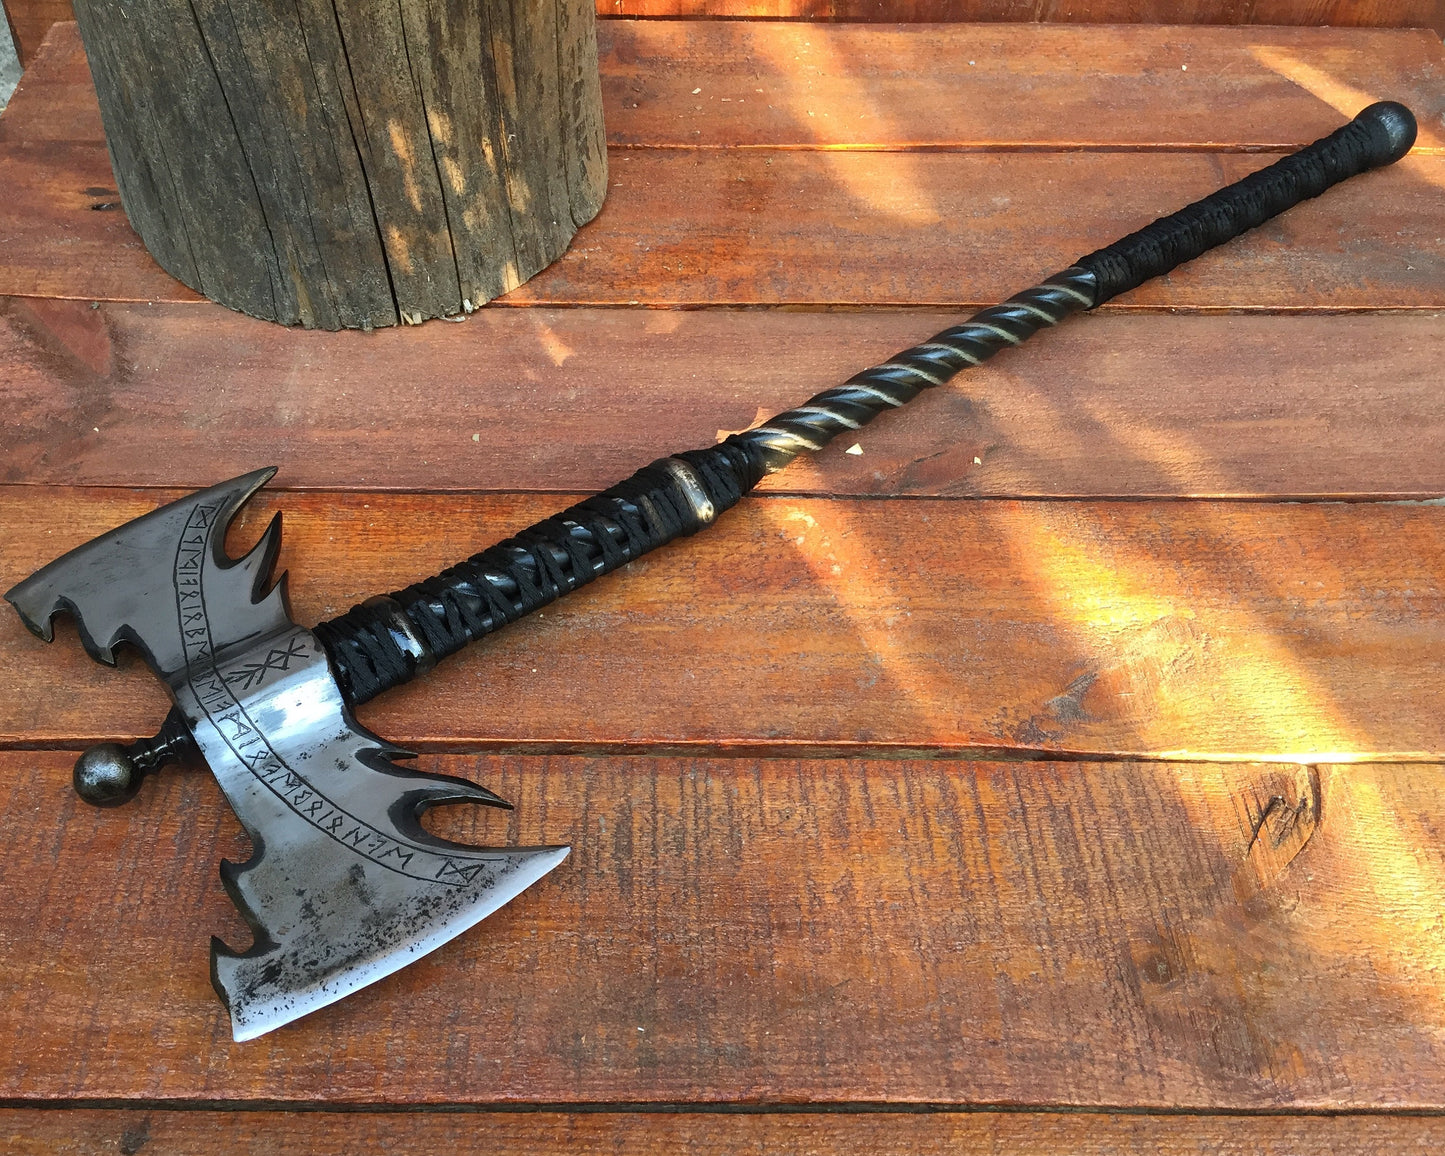  Kitchen axe, viking axe, axe, tomahawk, ax, hatchet, knife,  iron gifts, manly gift, mens gift, medieval axe,viking camp kit, viking  gifts : עבודת יד